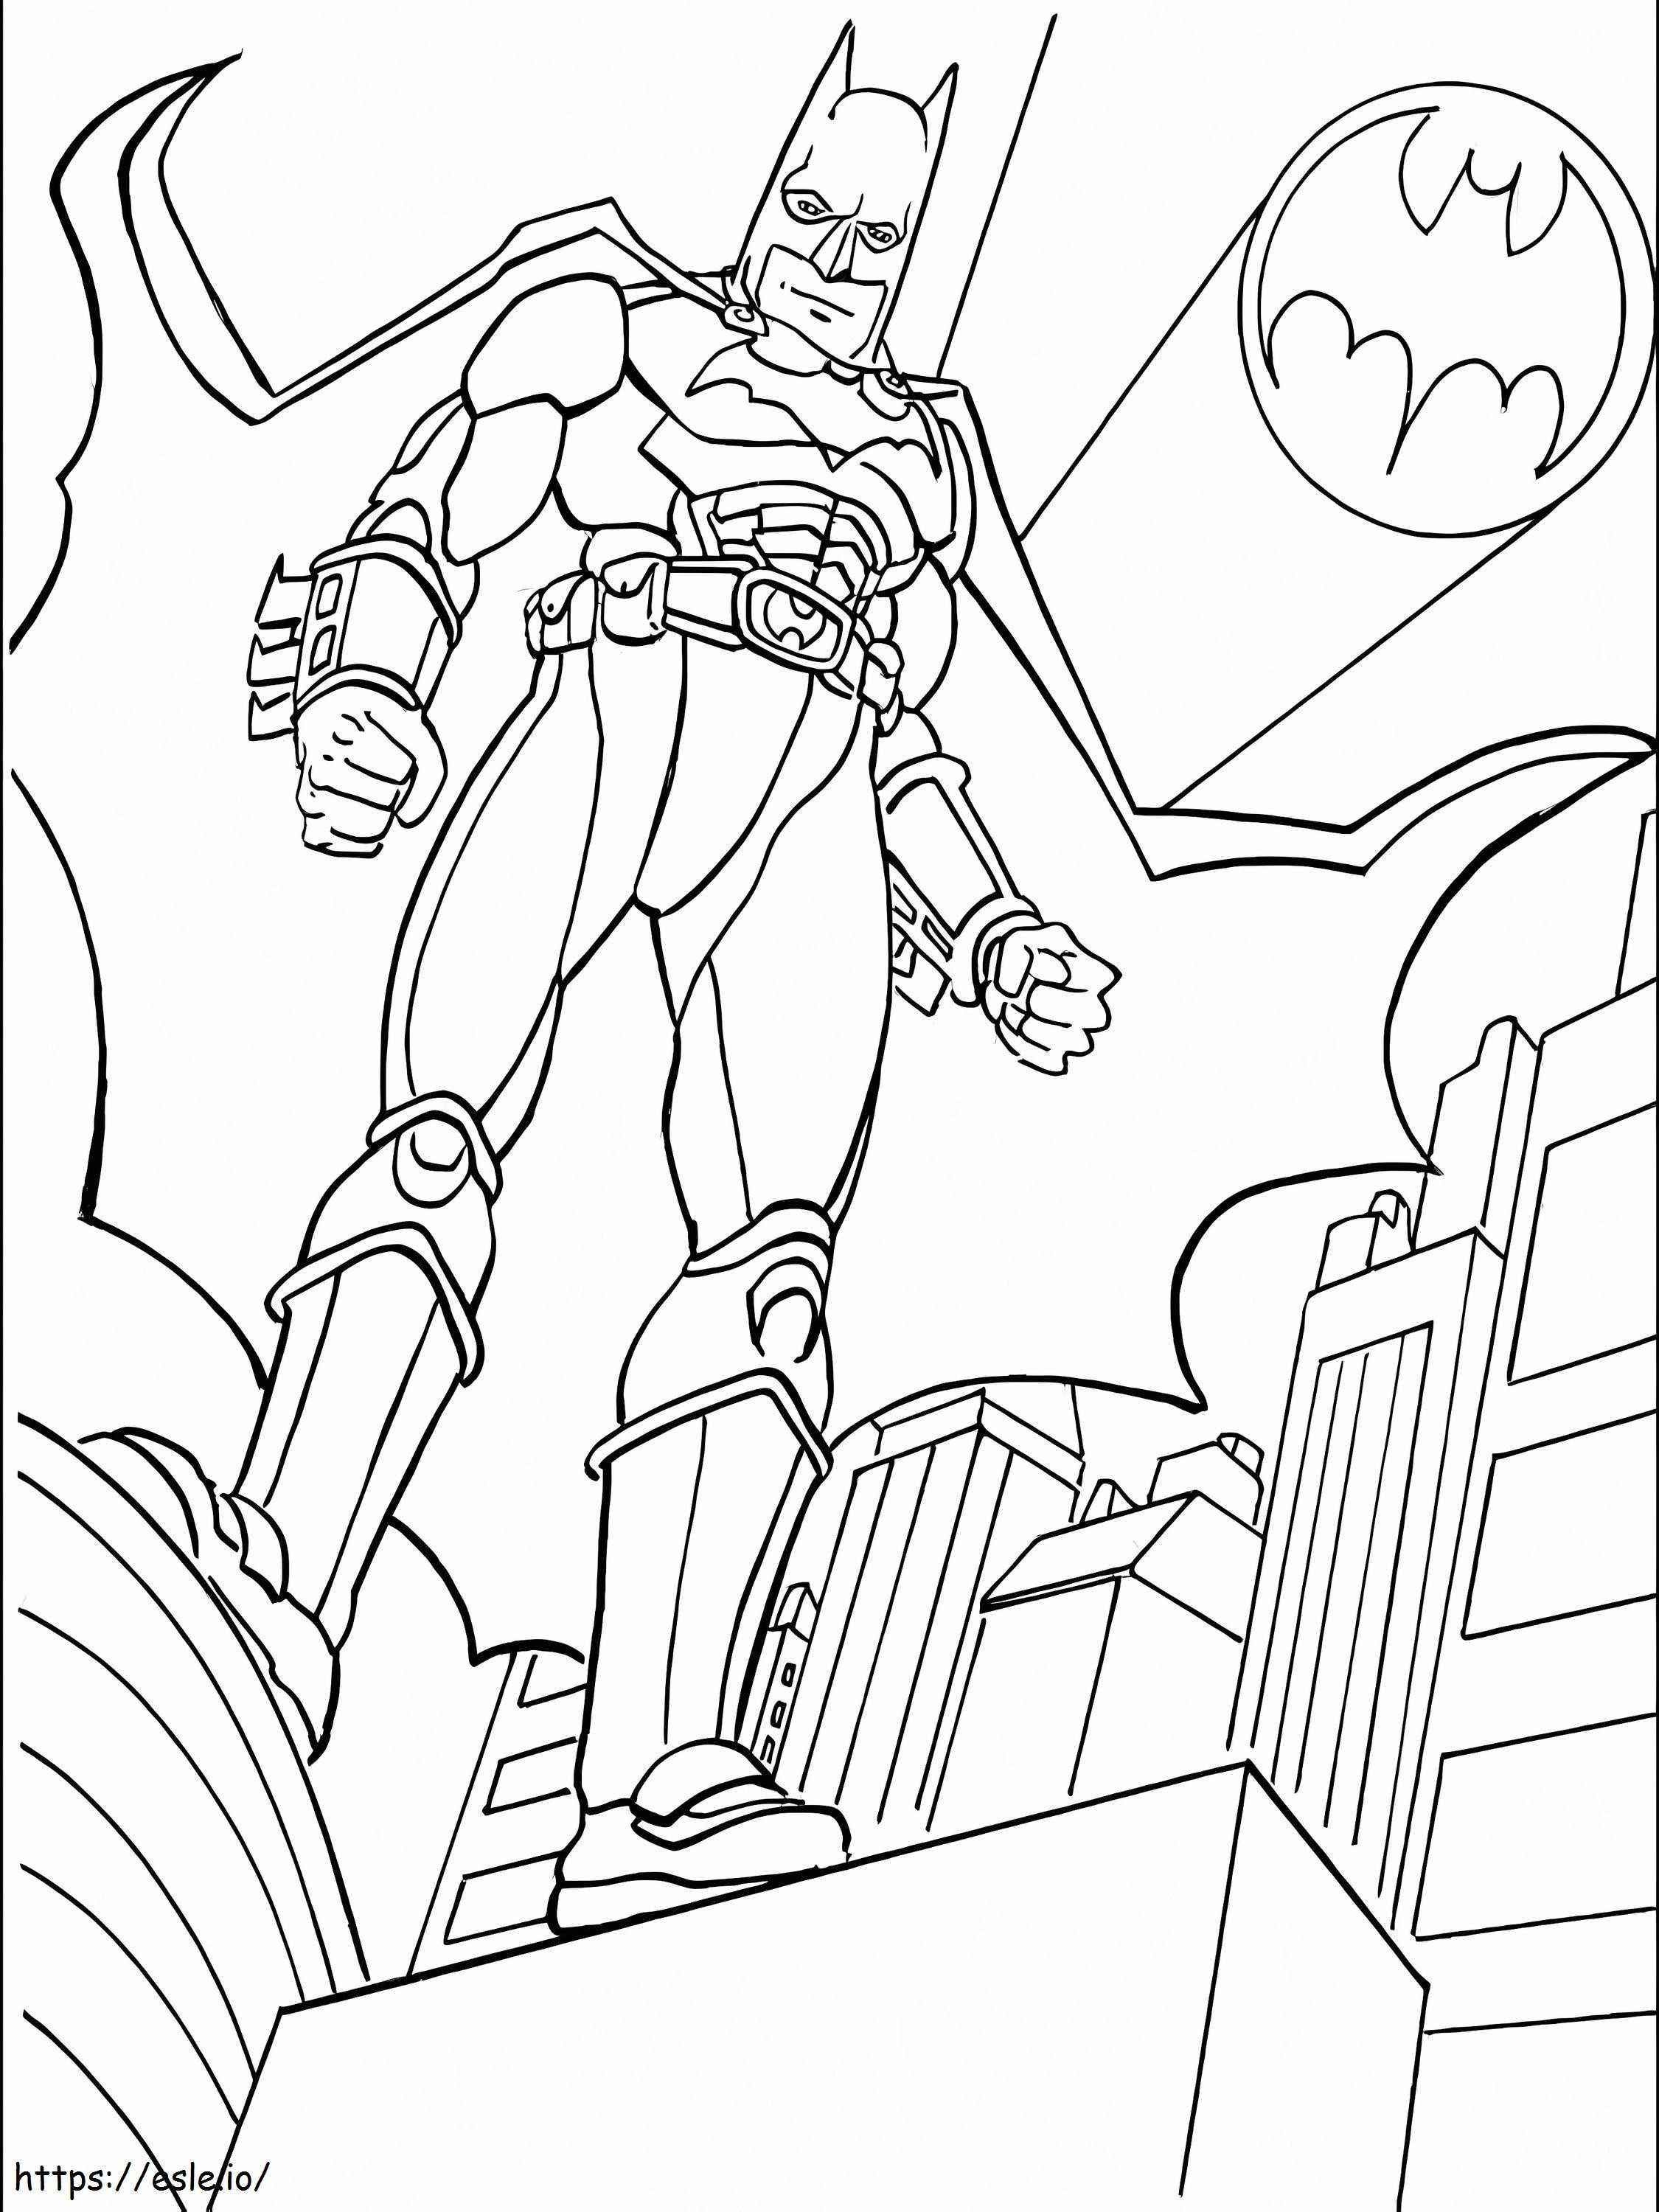 Batman In The City coloring page